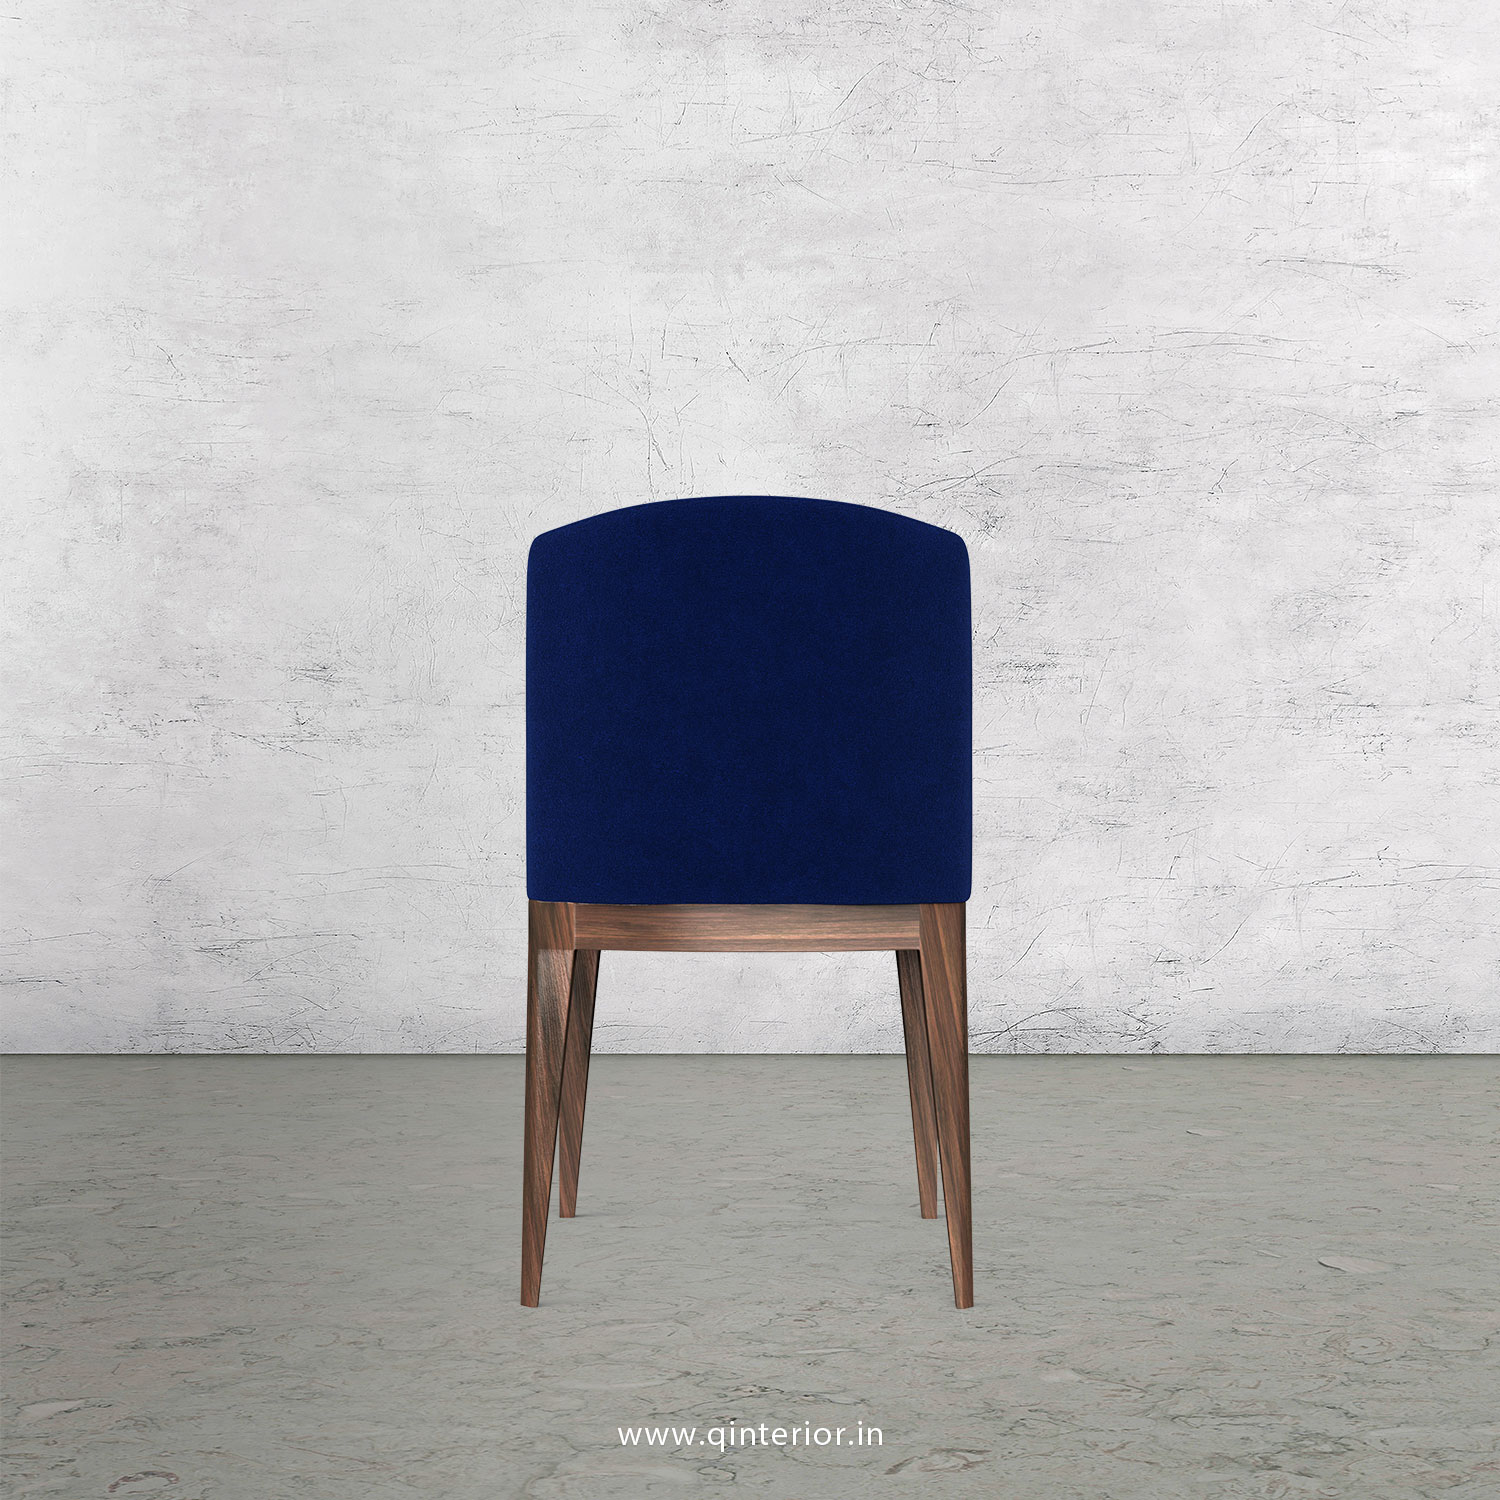 Cario Dining Chair in Velvet Fabric - DCH001 VL05